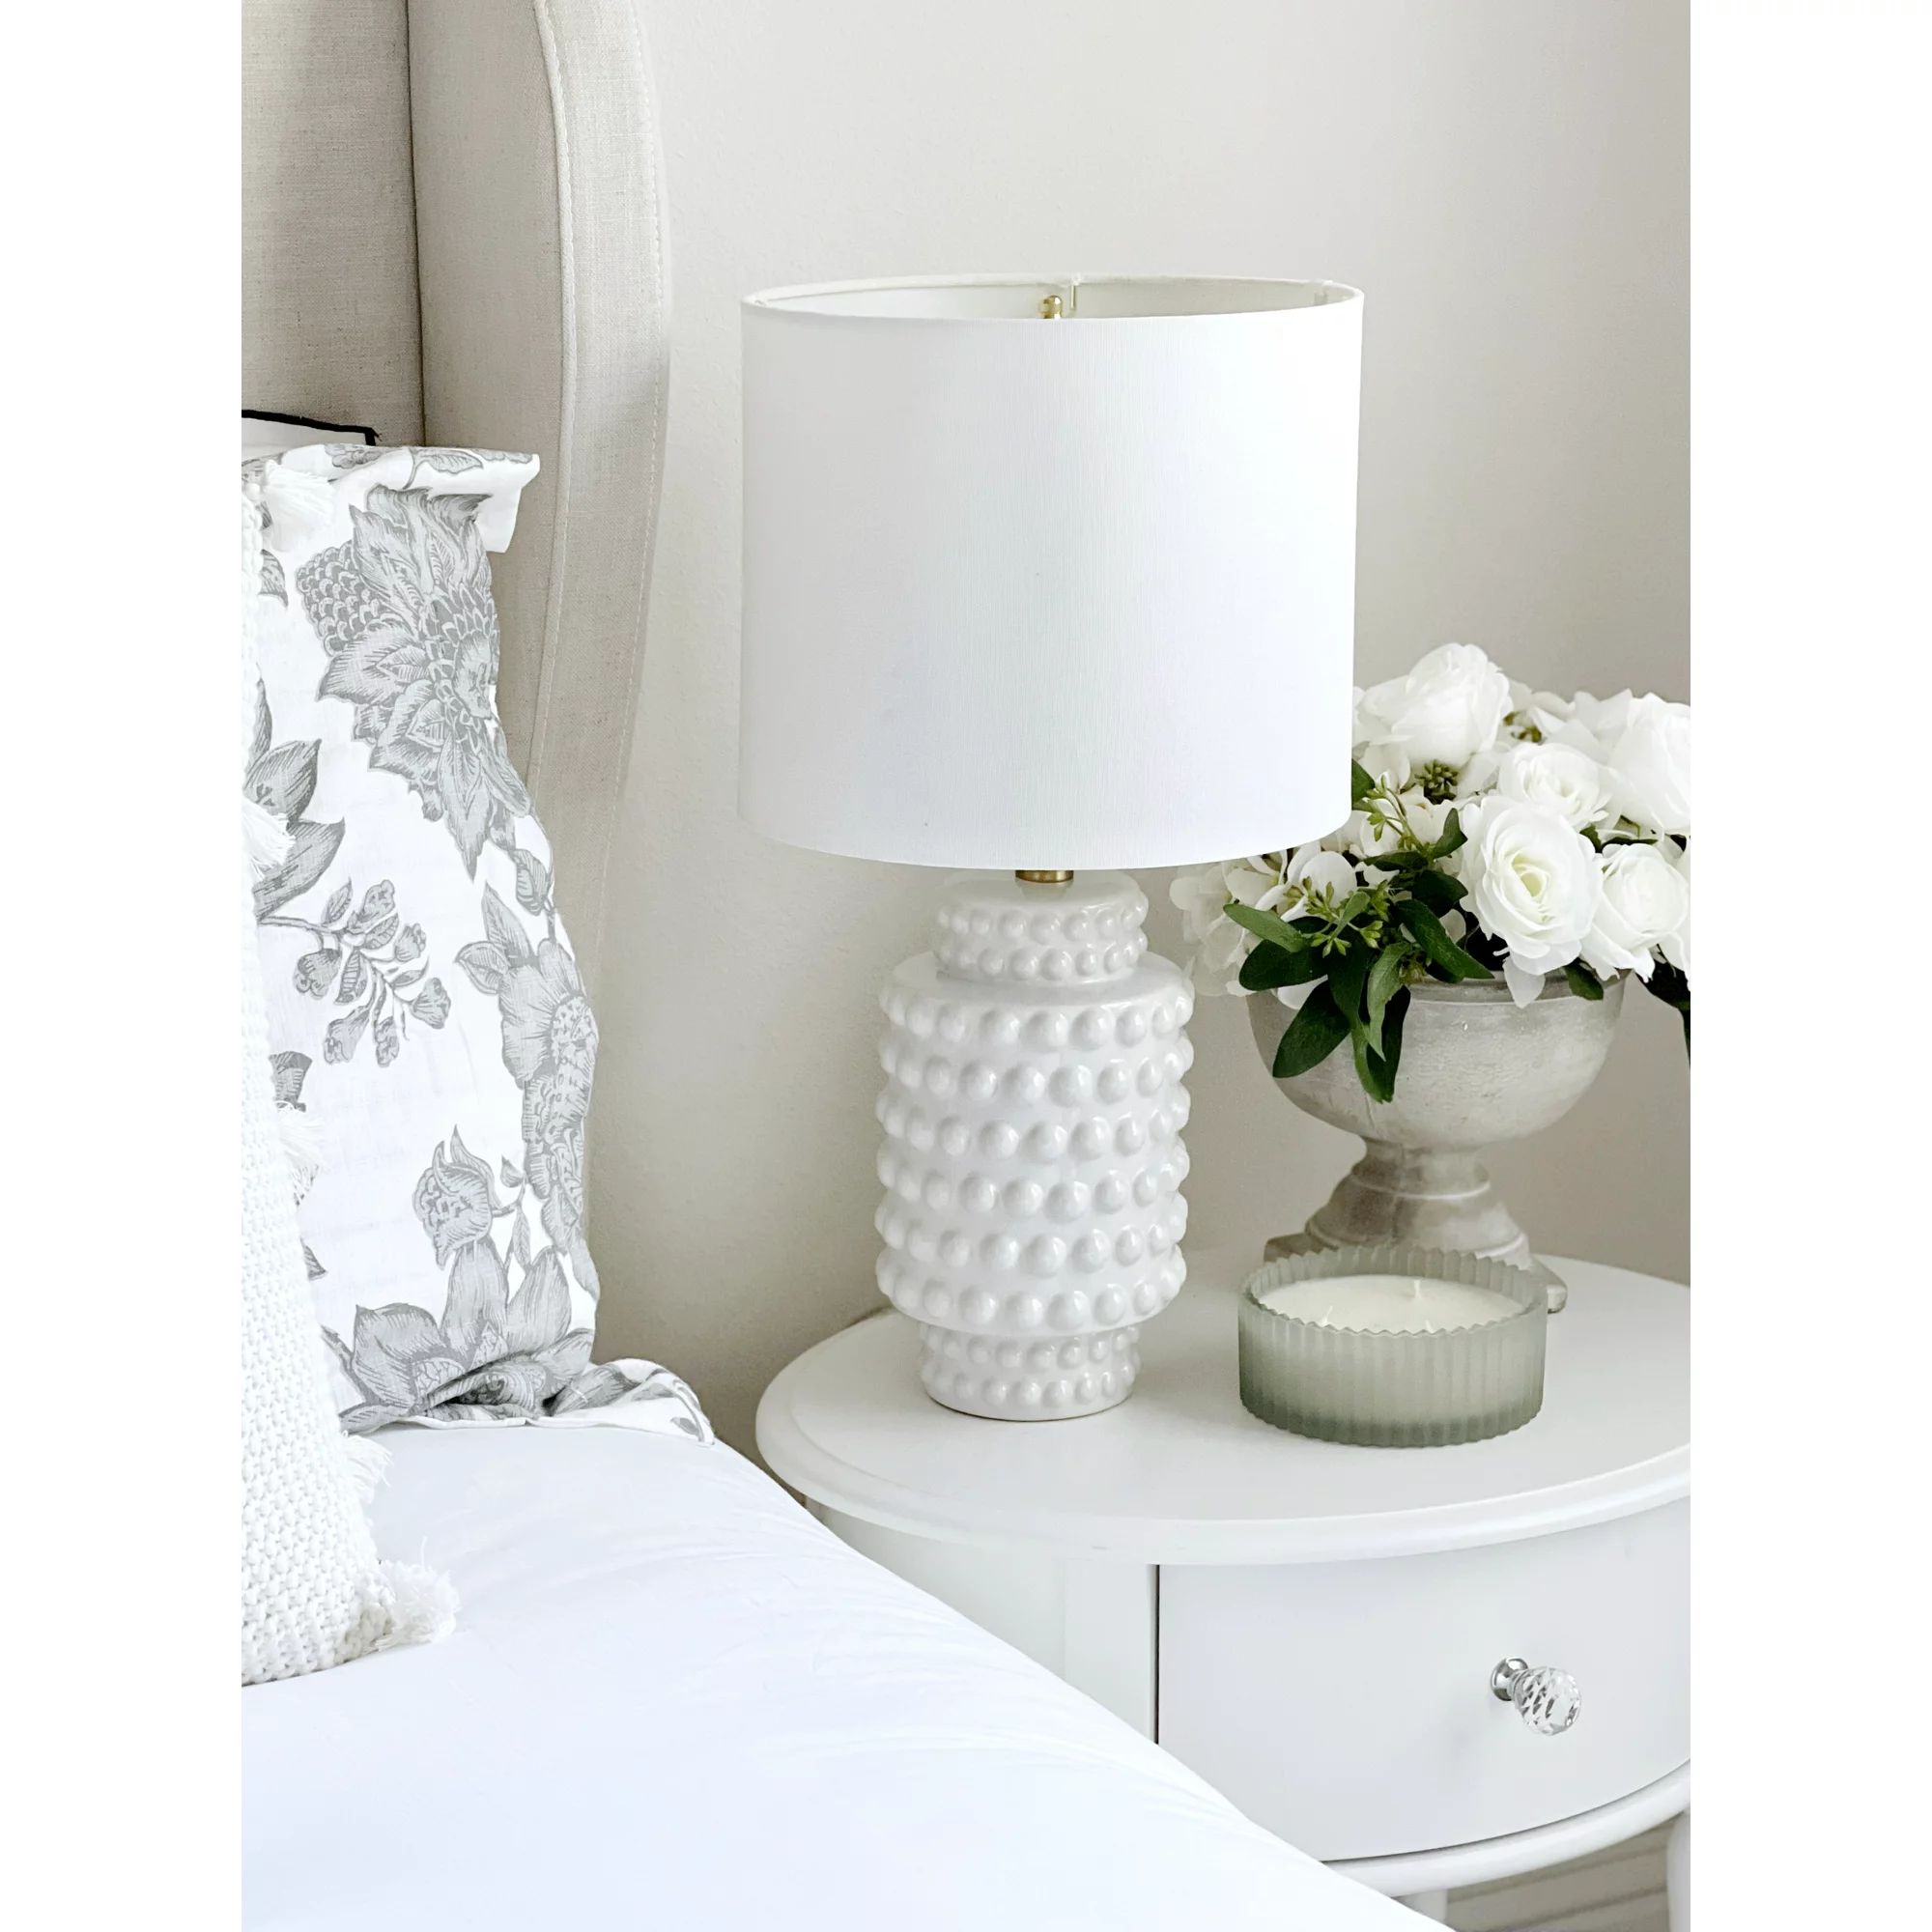 My Texas House 21" Hob-Nail Ceramic Table Lamp, Brass Accents, White Finish | Walmart (US)